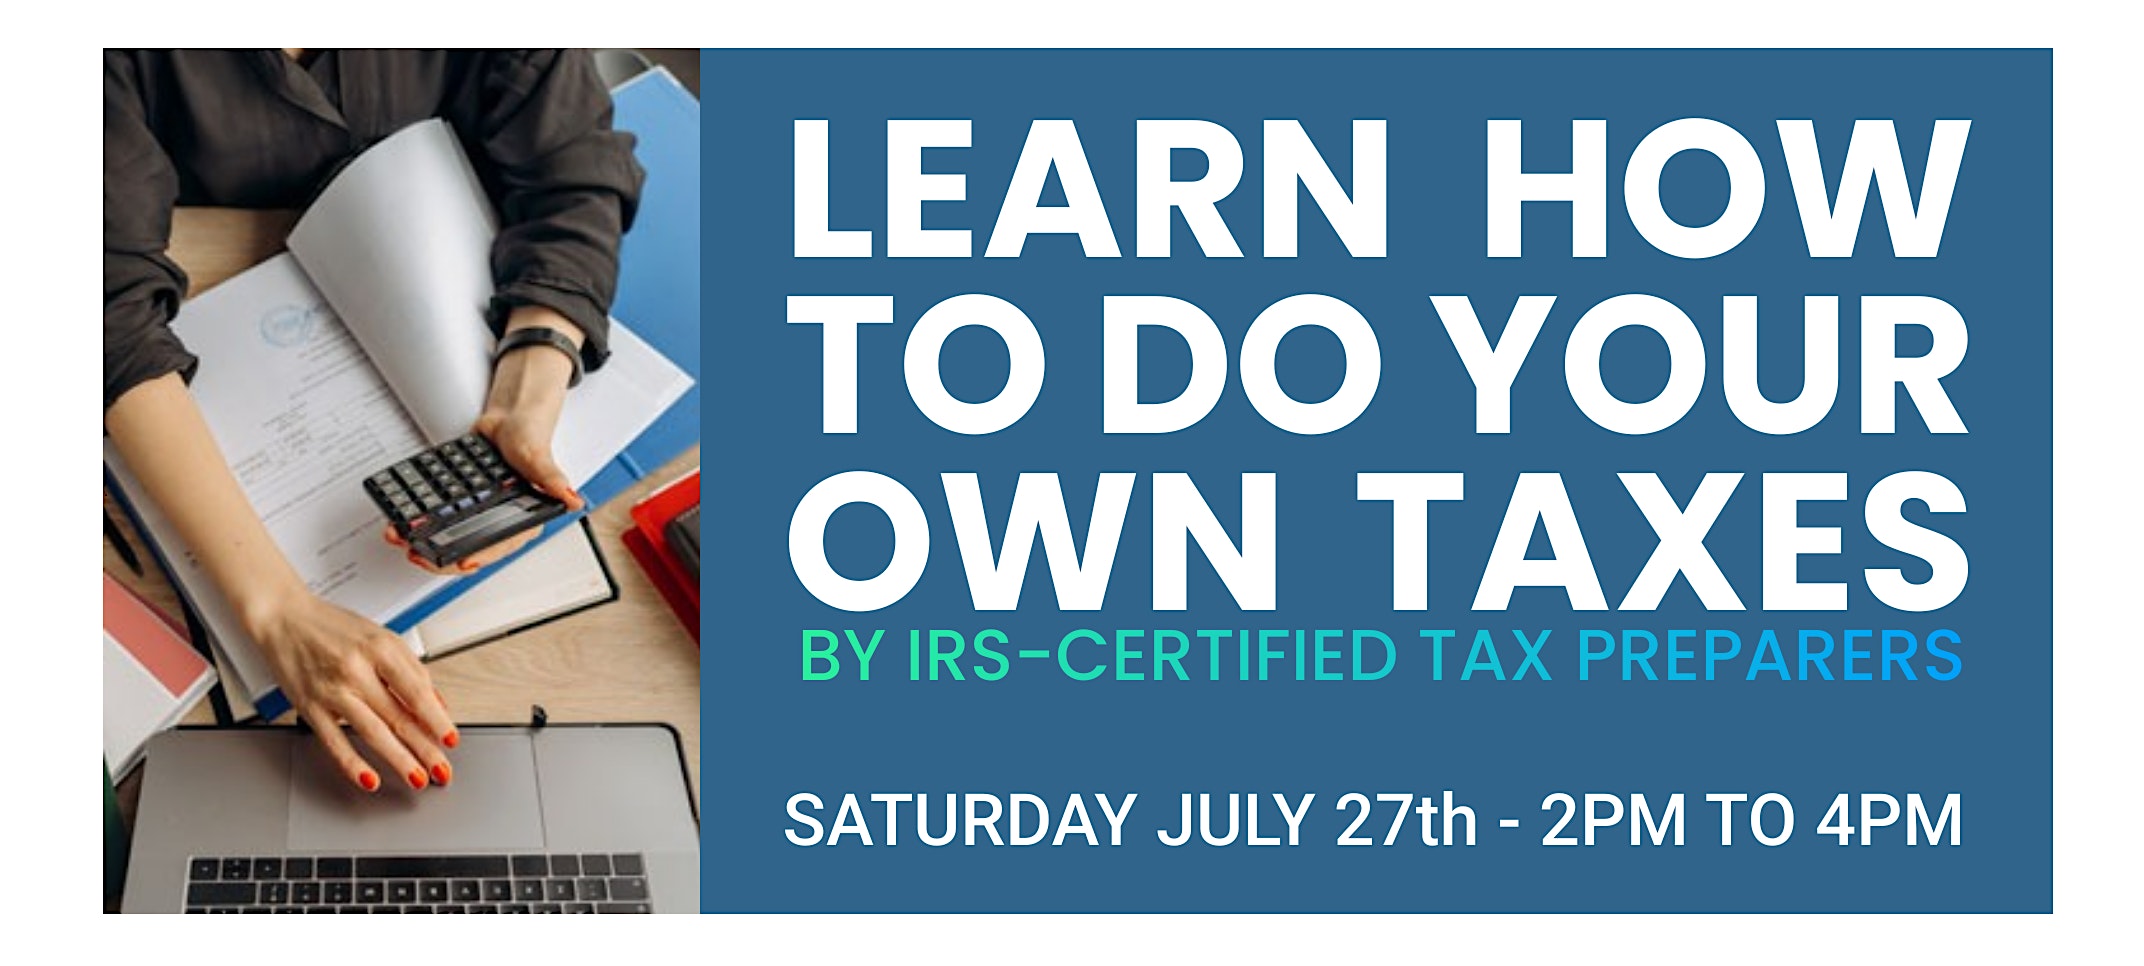 LEARN HOW TO DO YOUR OWN TAXES!